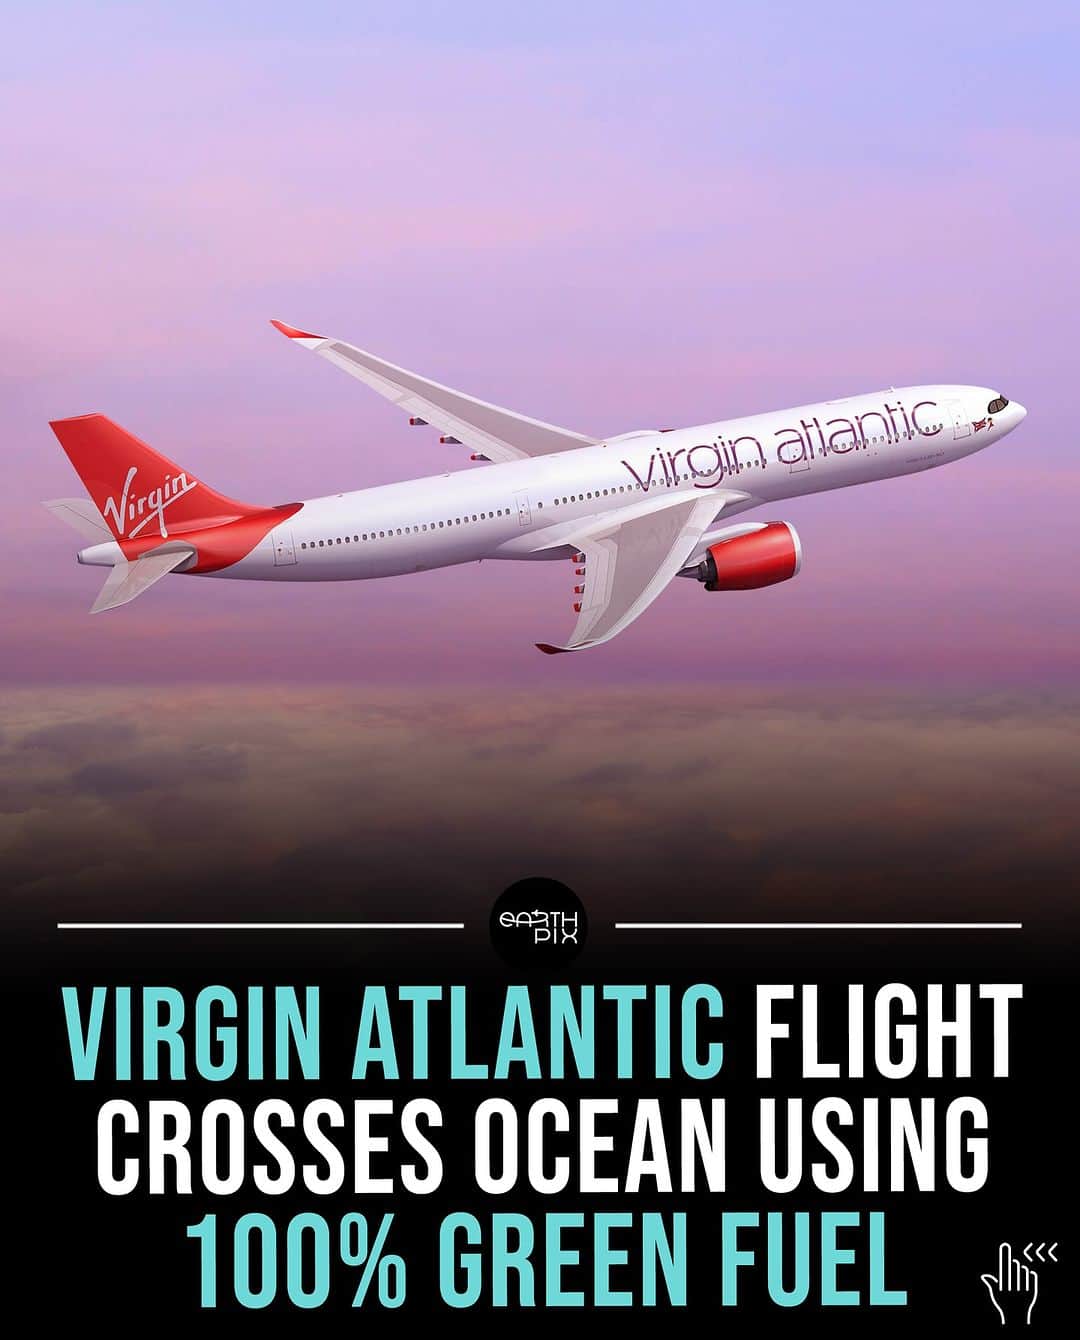 Earth Picsのインスタグラム：「Virgin Atlantic achieved a groundbreaking milestone with the world’s first commercial airline flight from London to New York powered entirely by 100% Sustainable Aviation Fuel (SAF).   This innovative fuel, derived from waste products, provides up to a 70% reduction in CO2 lifecycle emissions compared to conventional jet fuel.   The historic flight, made possible by a consortium led by Virgin Atlantic and involving Boeing, Rolls-Royce, Imperial College London, University of Sheffield, ICF, and Rocky Mountain Institute, highlights SAF as a promising mid-term solution for reducing carbon emissions in long-haul aviation. ✈️」